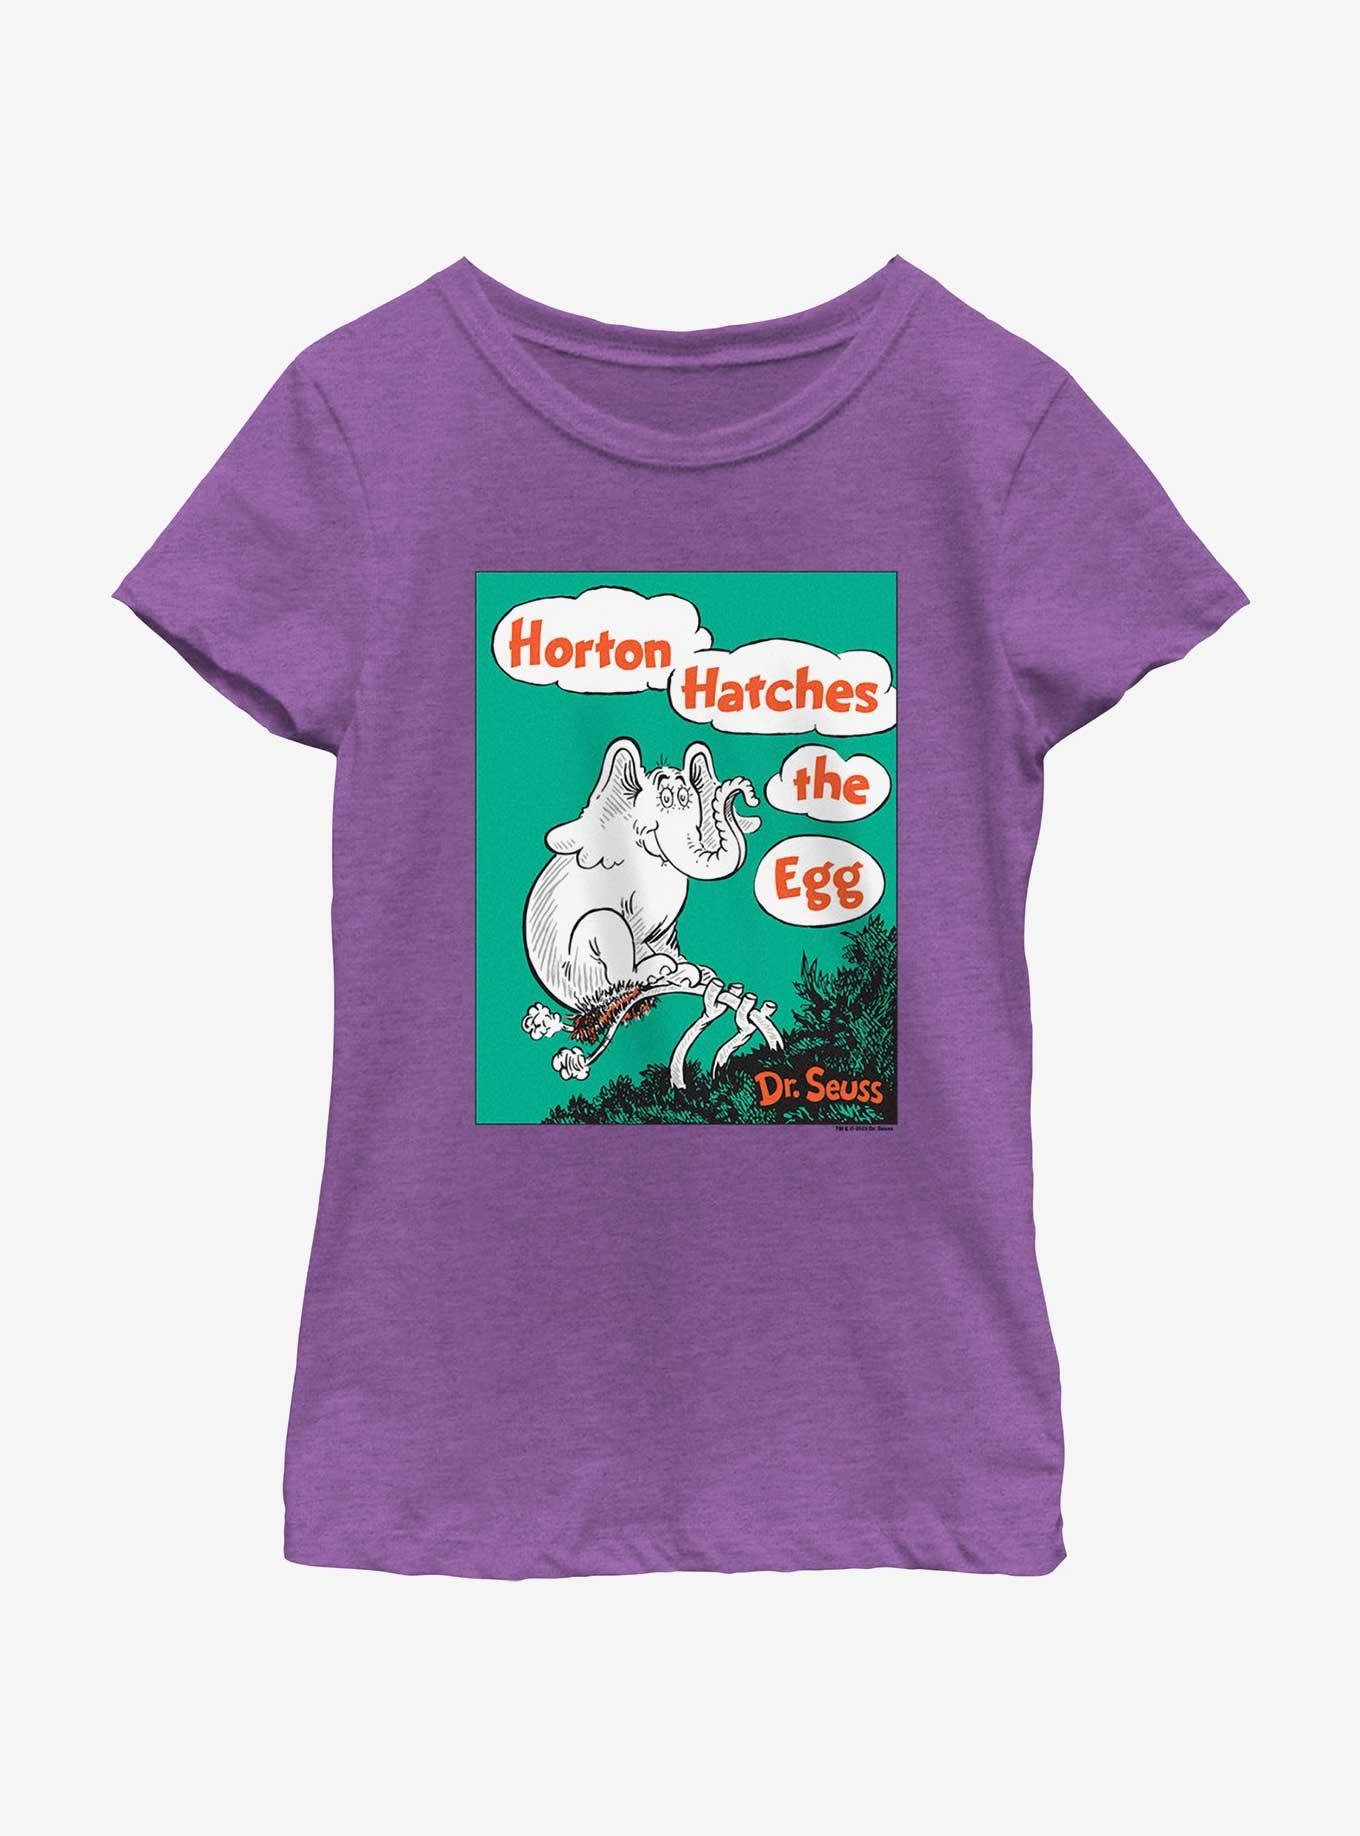 Dr. Seuss's Horton Hatches The Egg Cover Youth Girls T-Shirt, PURPLE BERRY, hi-res